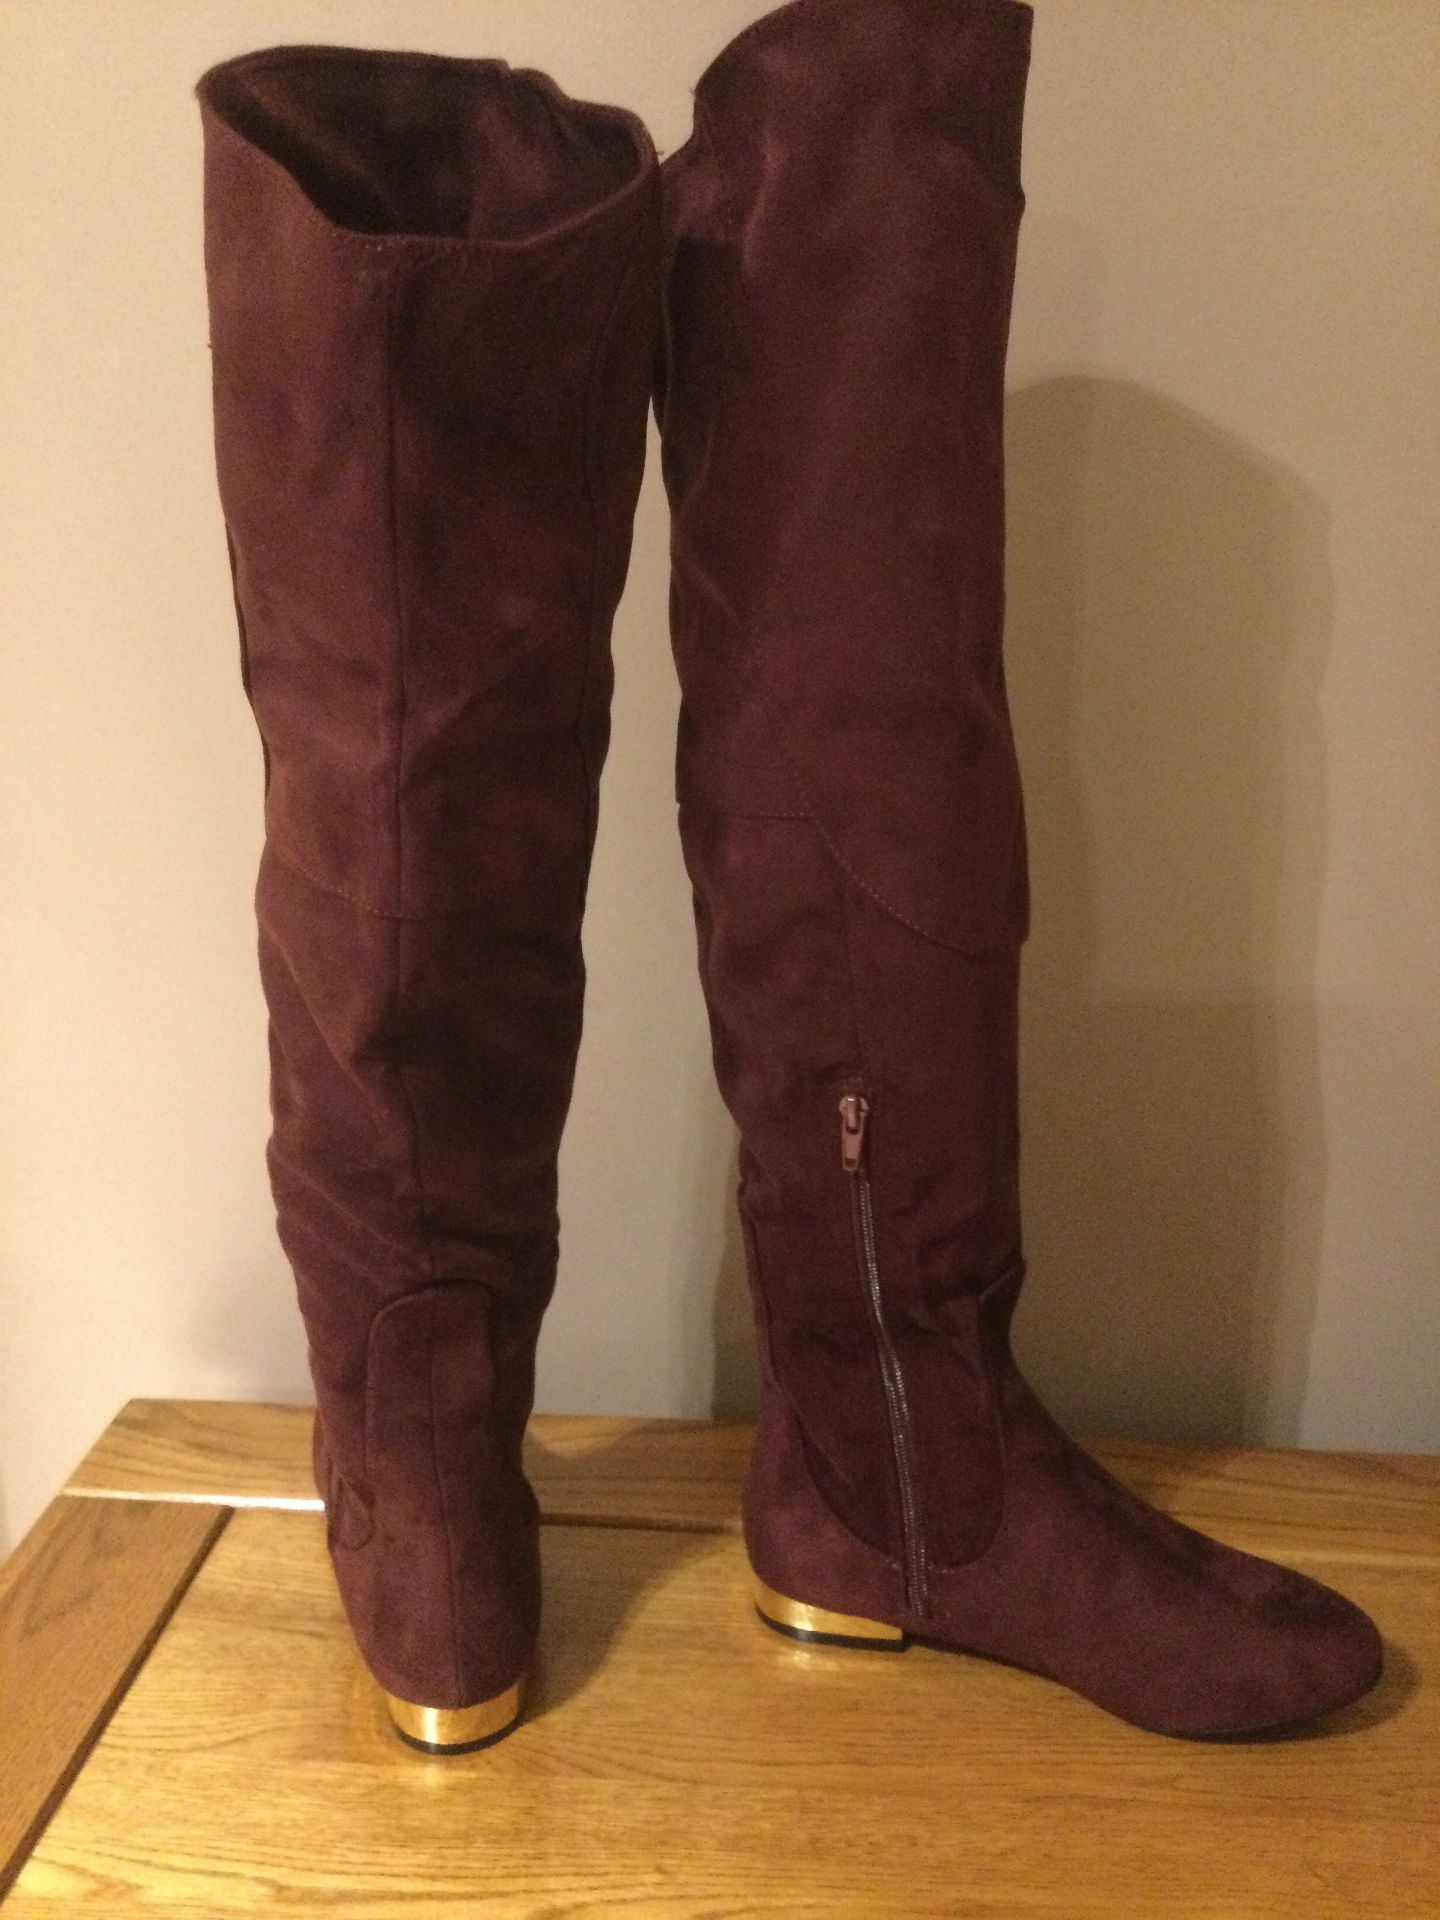 Dolcis “Katie” Long Boots, Low Heel, Size 4, Burgundy - New RRP £55.00 - Image 2 of 7